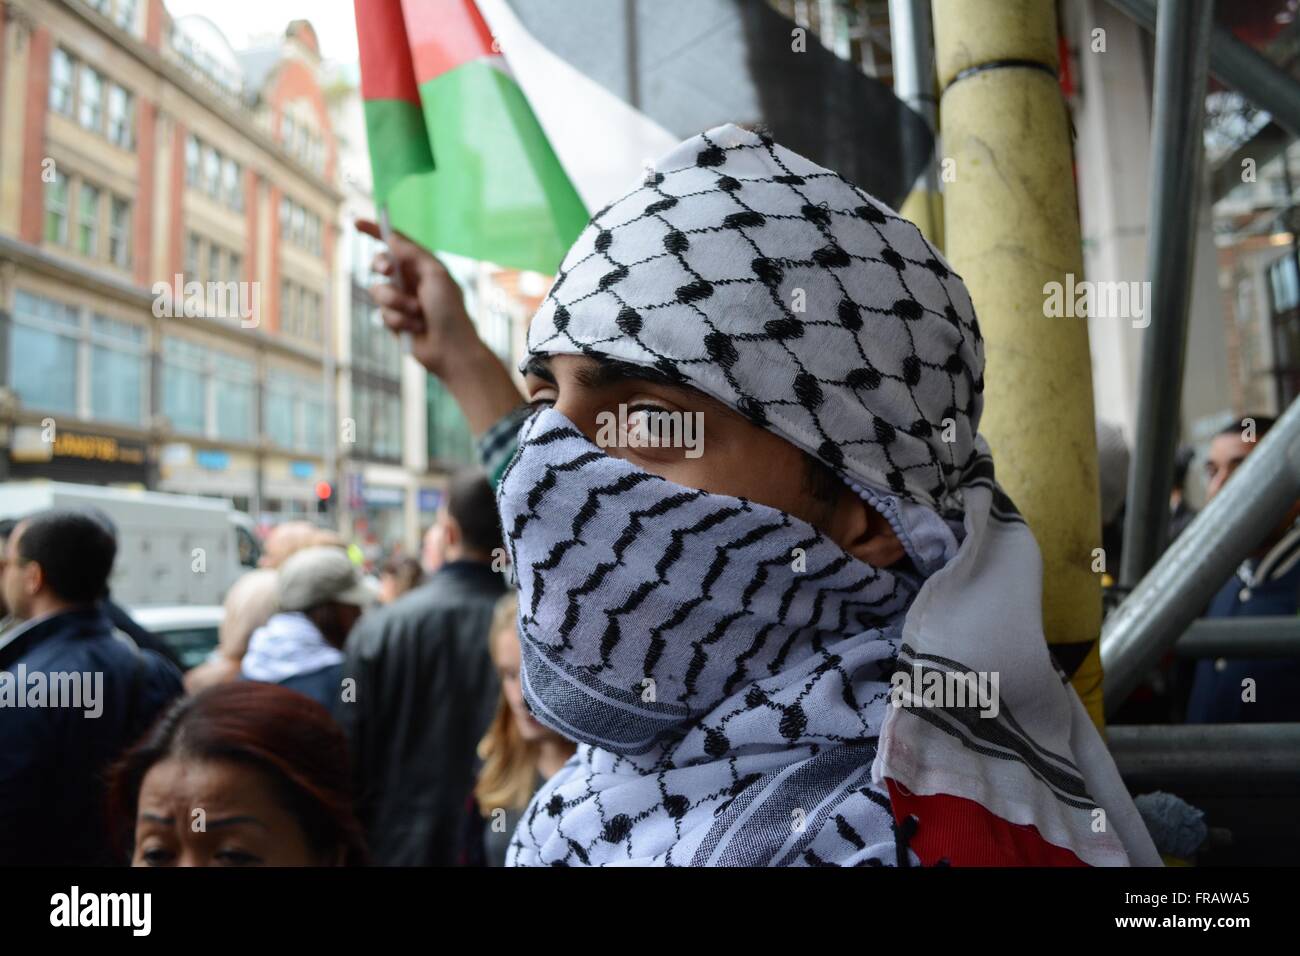 October 17th 2015. London, England. Protester in a face mask waves Palestinian flag in London. ©Marc Ward/Alamy Stock Photo